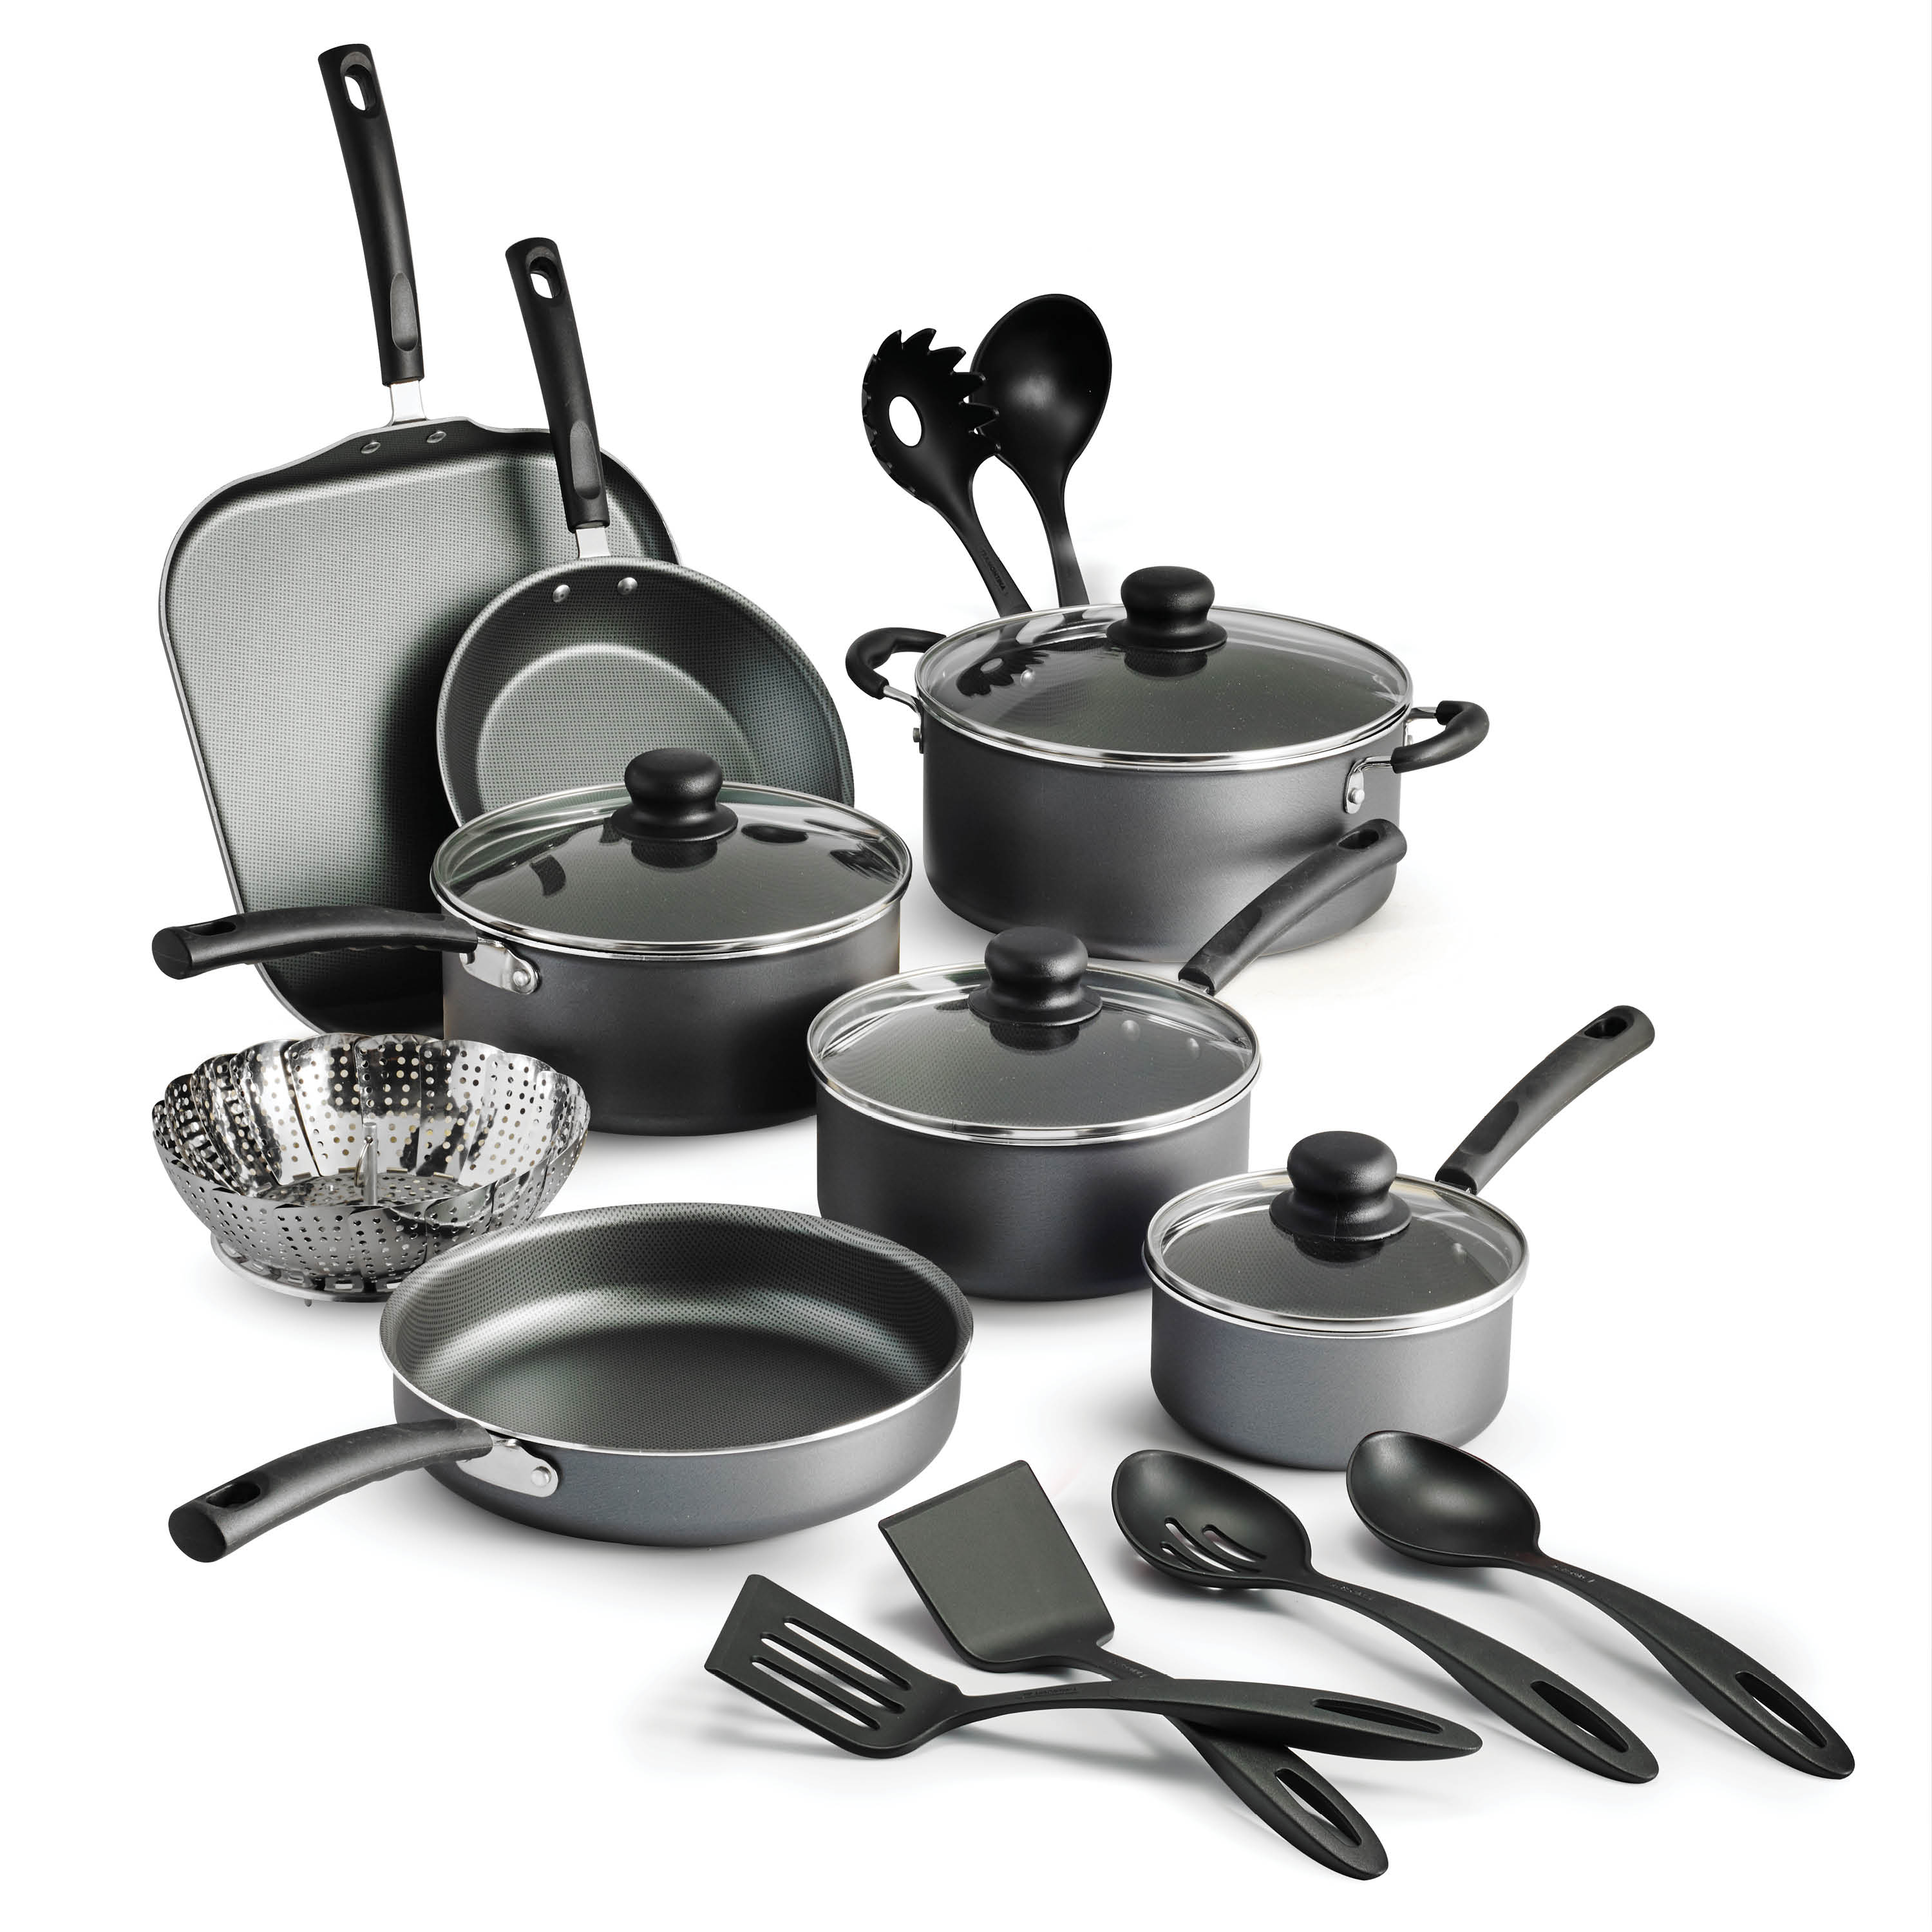 Tramontina Primaware 18 Piece Non-stick Cookware Set, Steel Gray - image 1 of 27